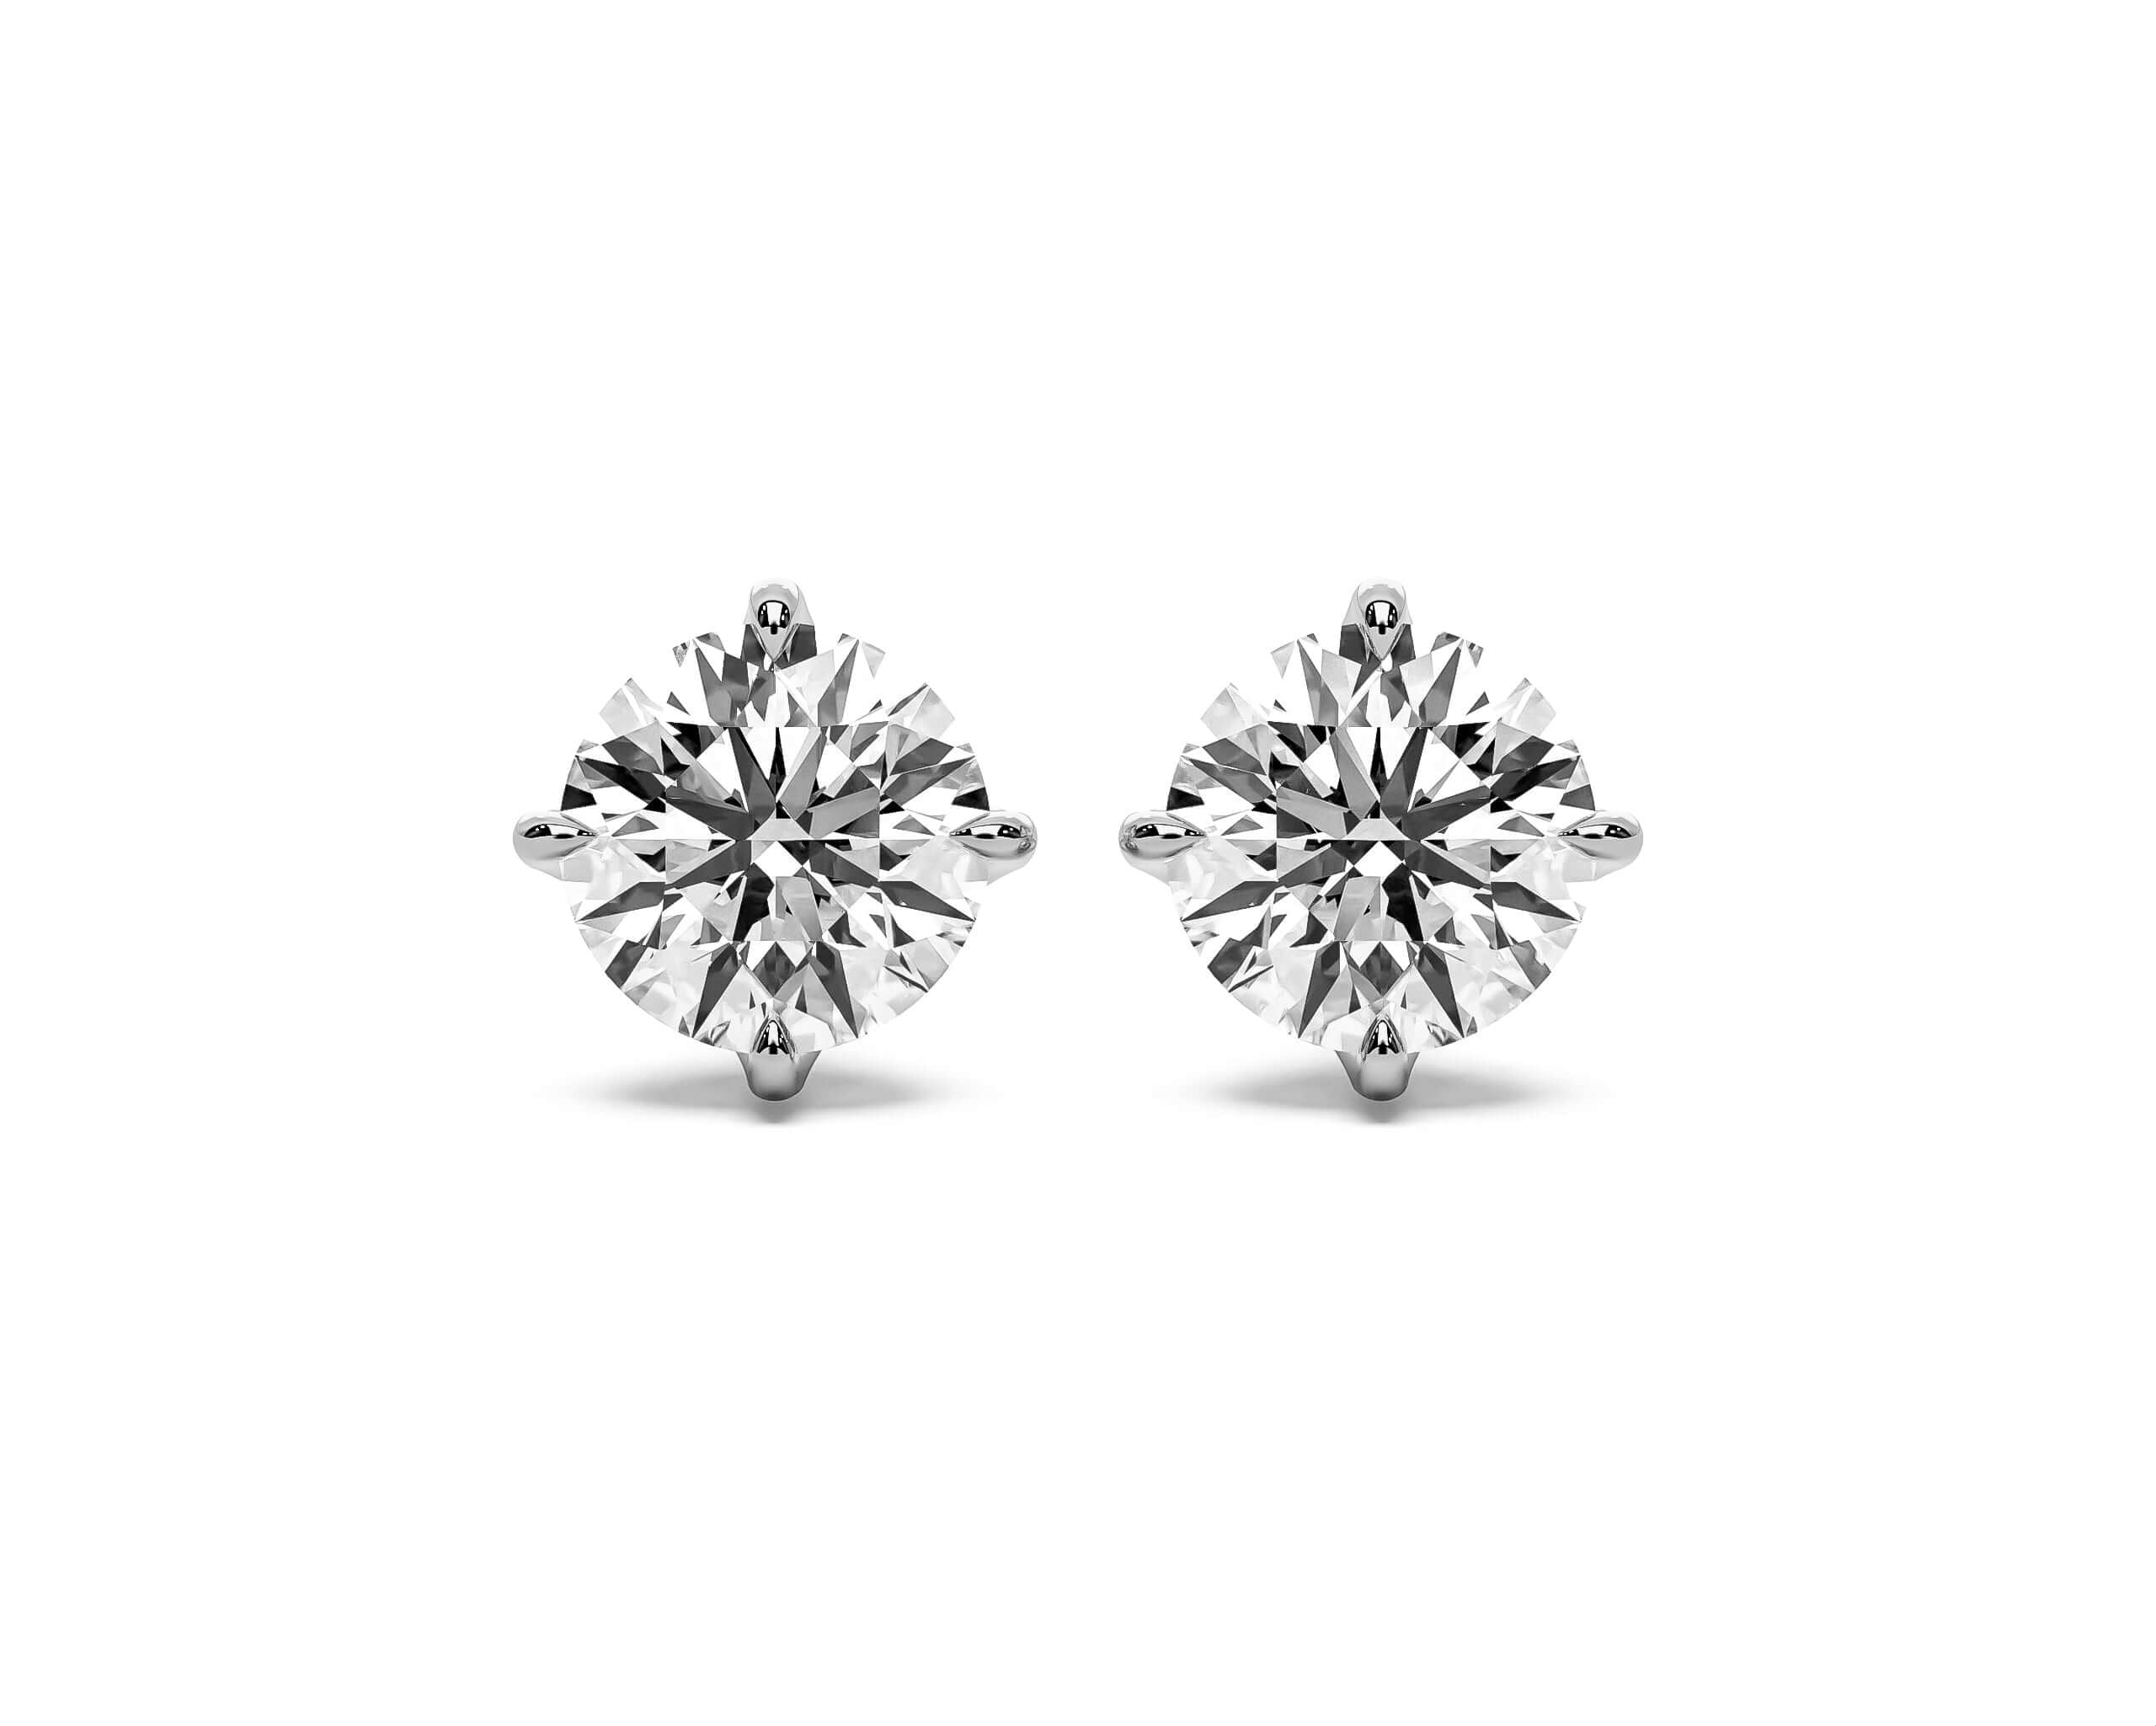 LAB LUXE - Round brilliant four claw Lab grown diamond earrings